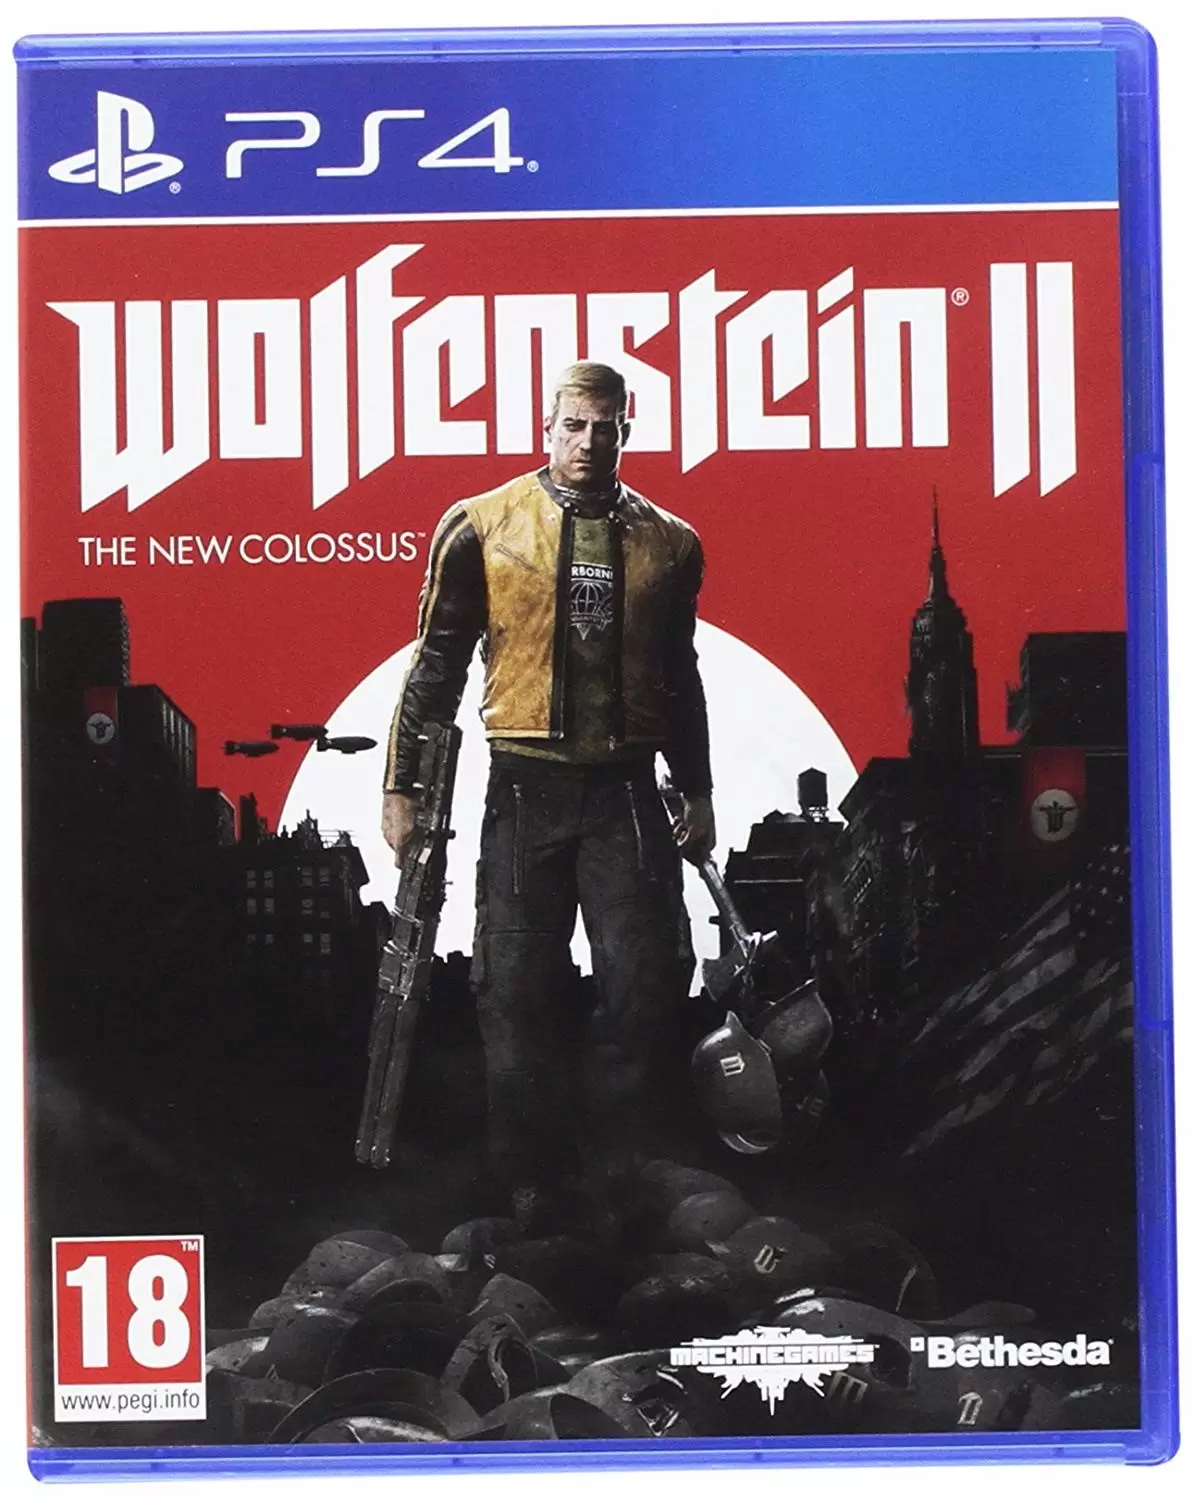 PS4 Games - Wolfenstein II : The New Colossus - Welcome to Amerika